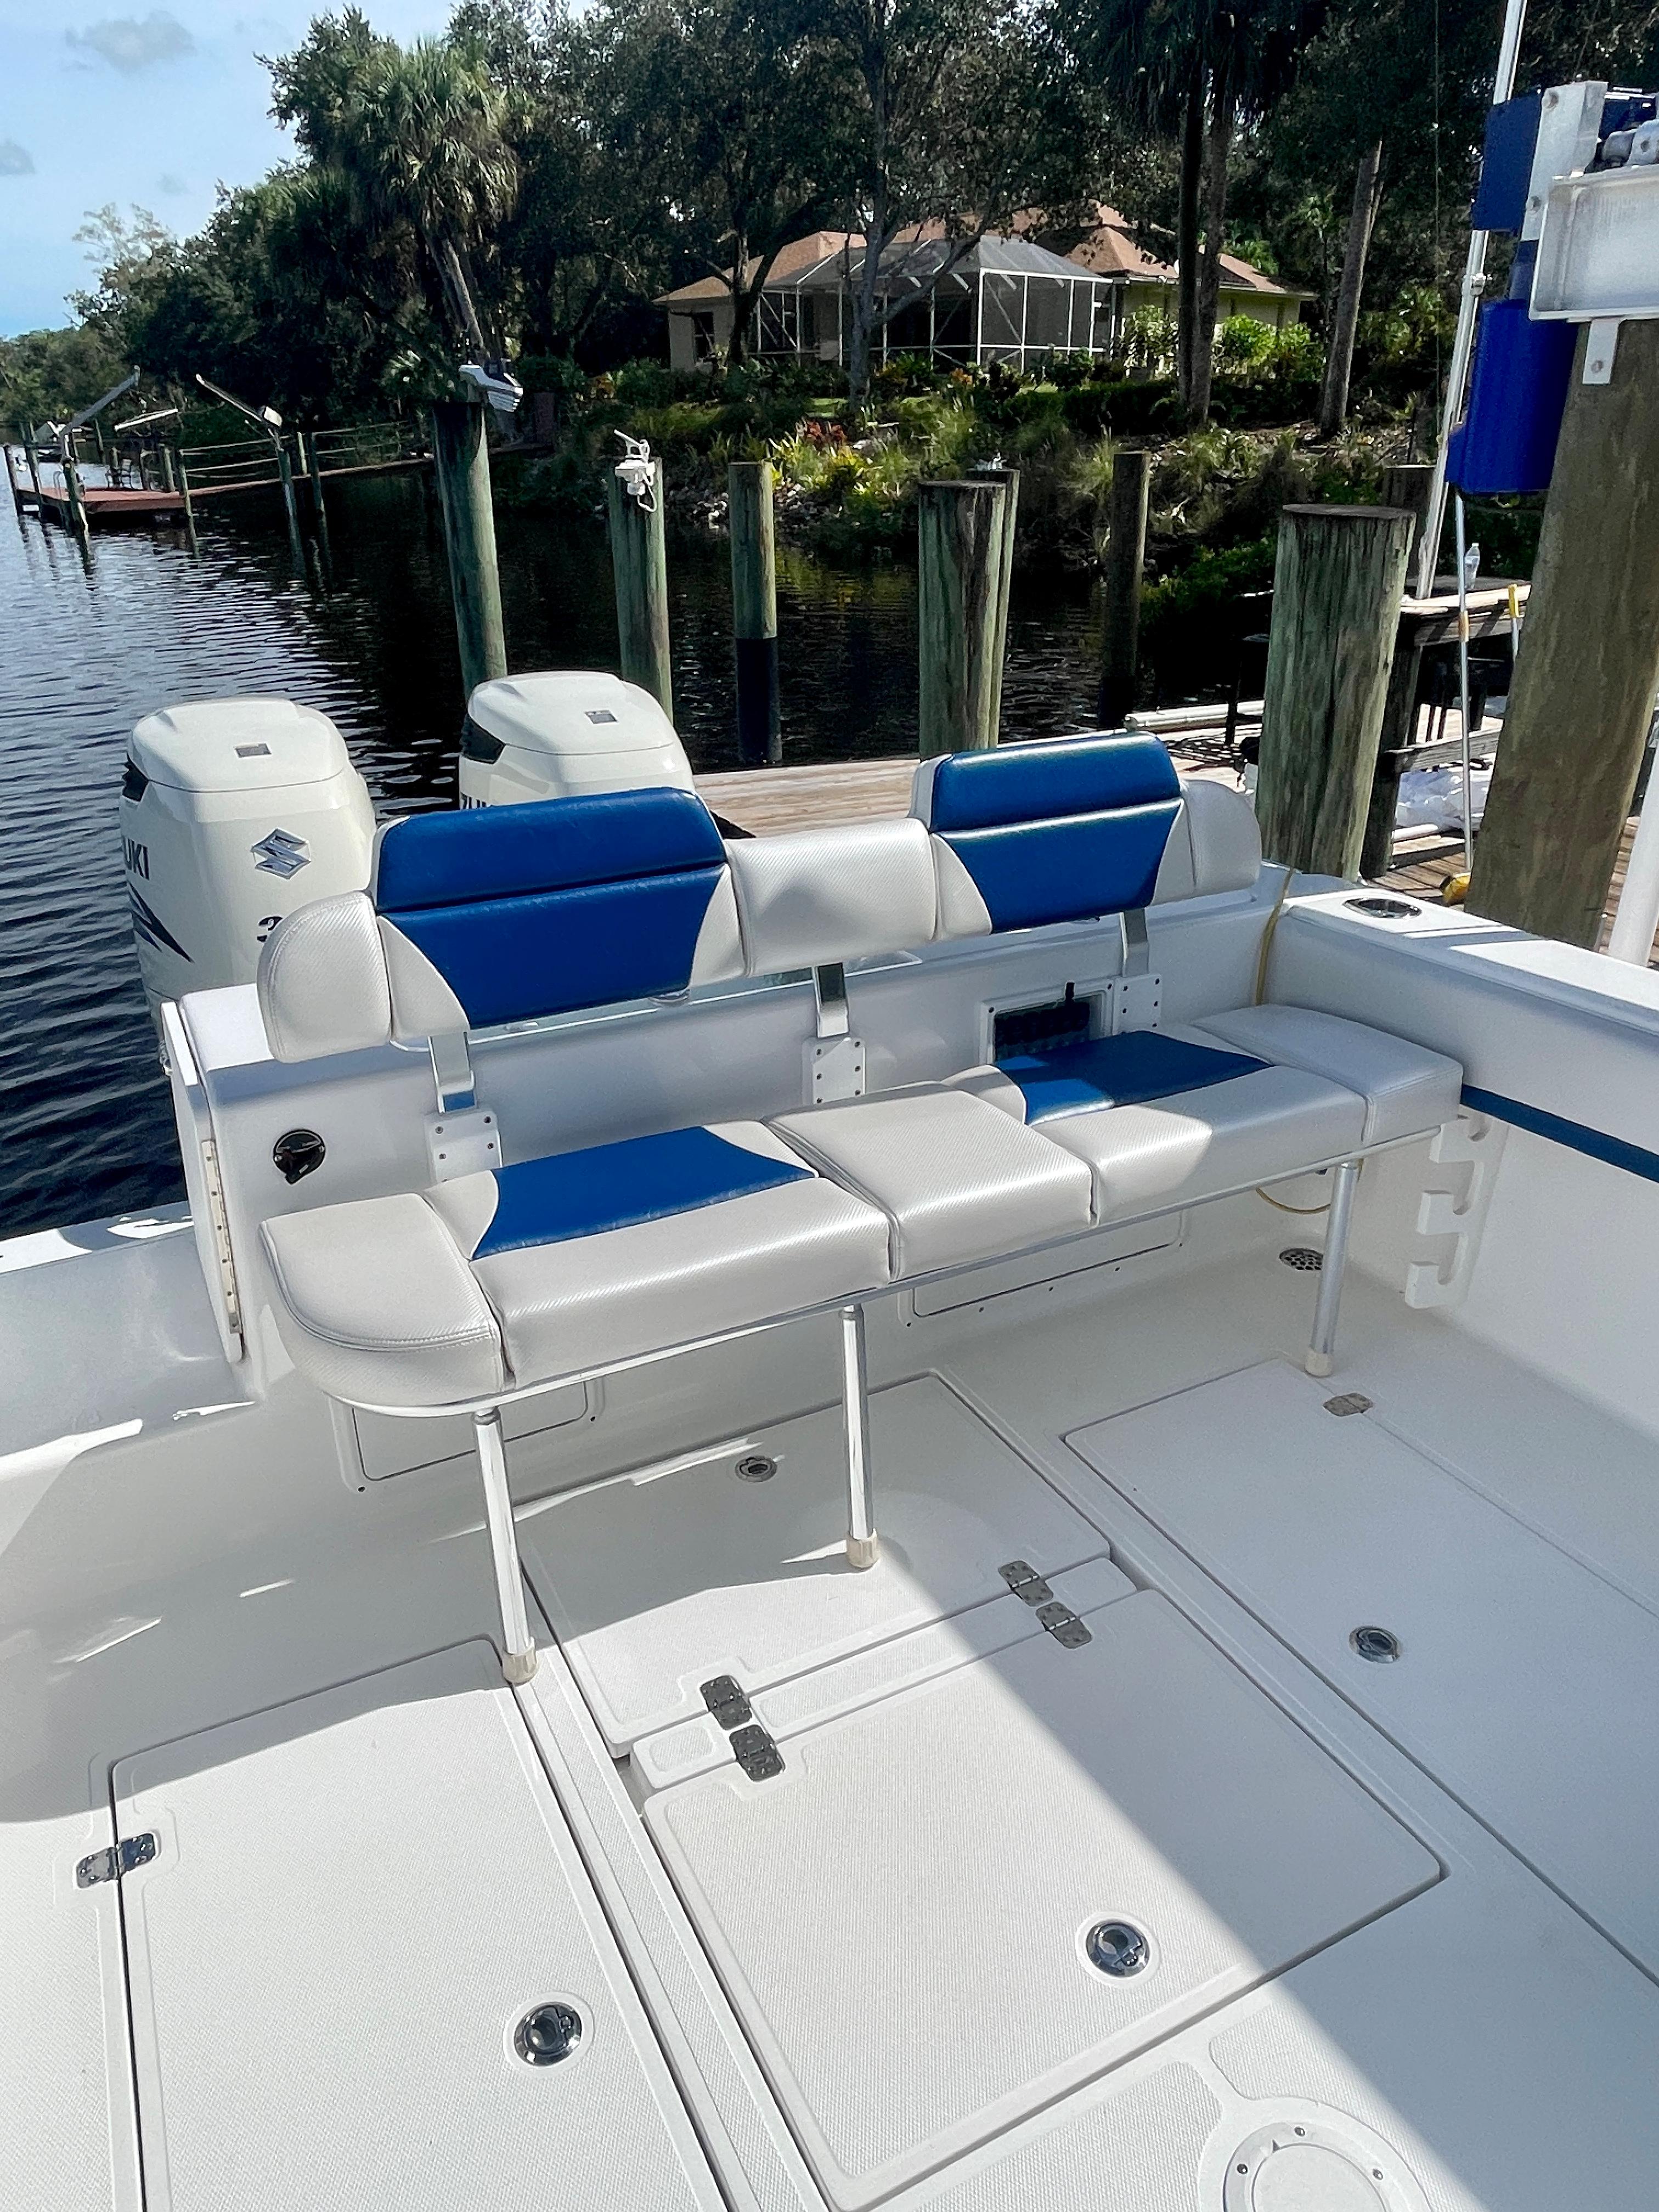 2016 Bluewater 2850 - Aft seating